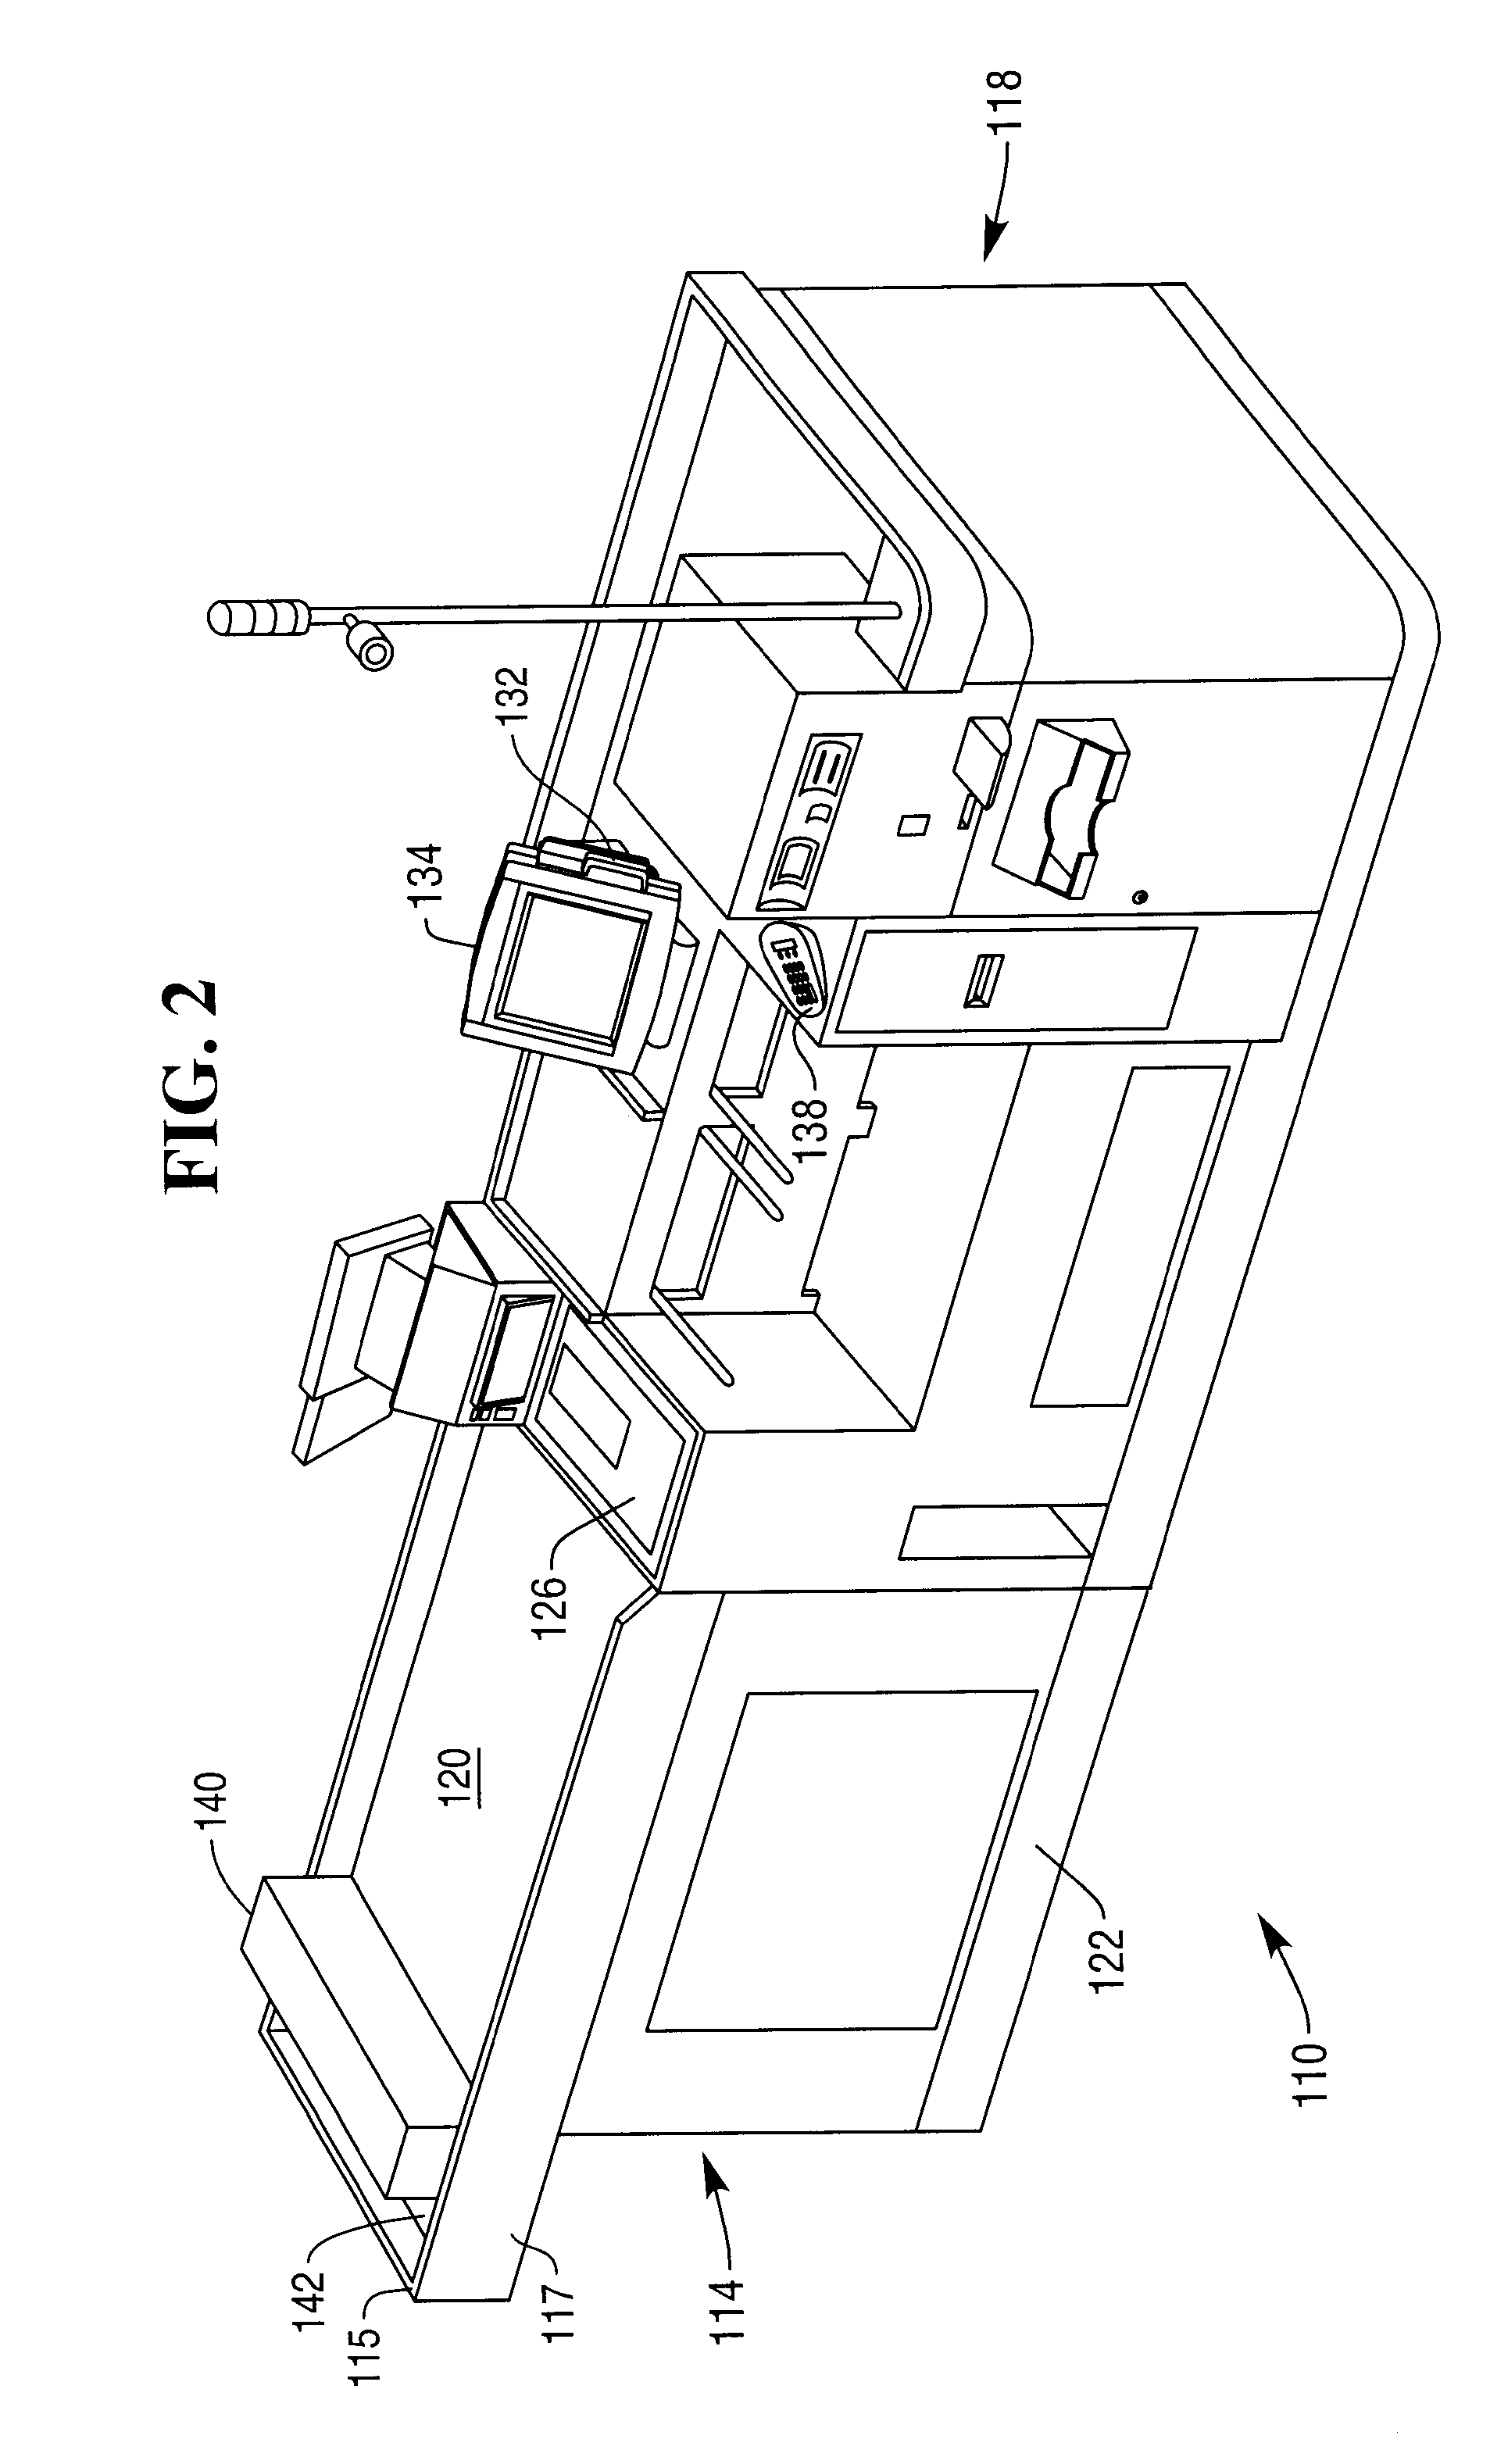 Methods and Apparatus for Germicidal Irradiation of Checkout System Surfaces